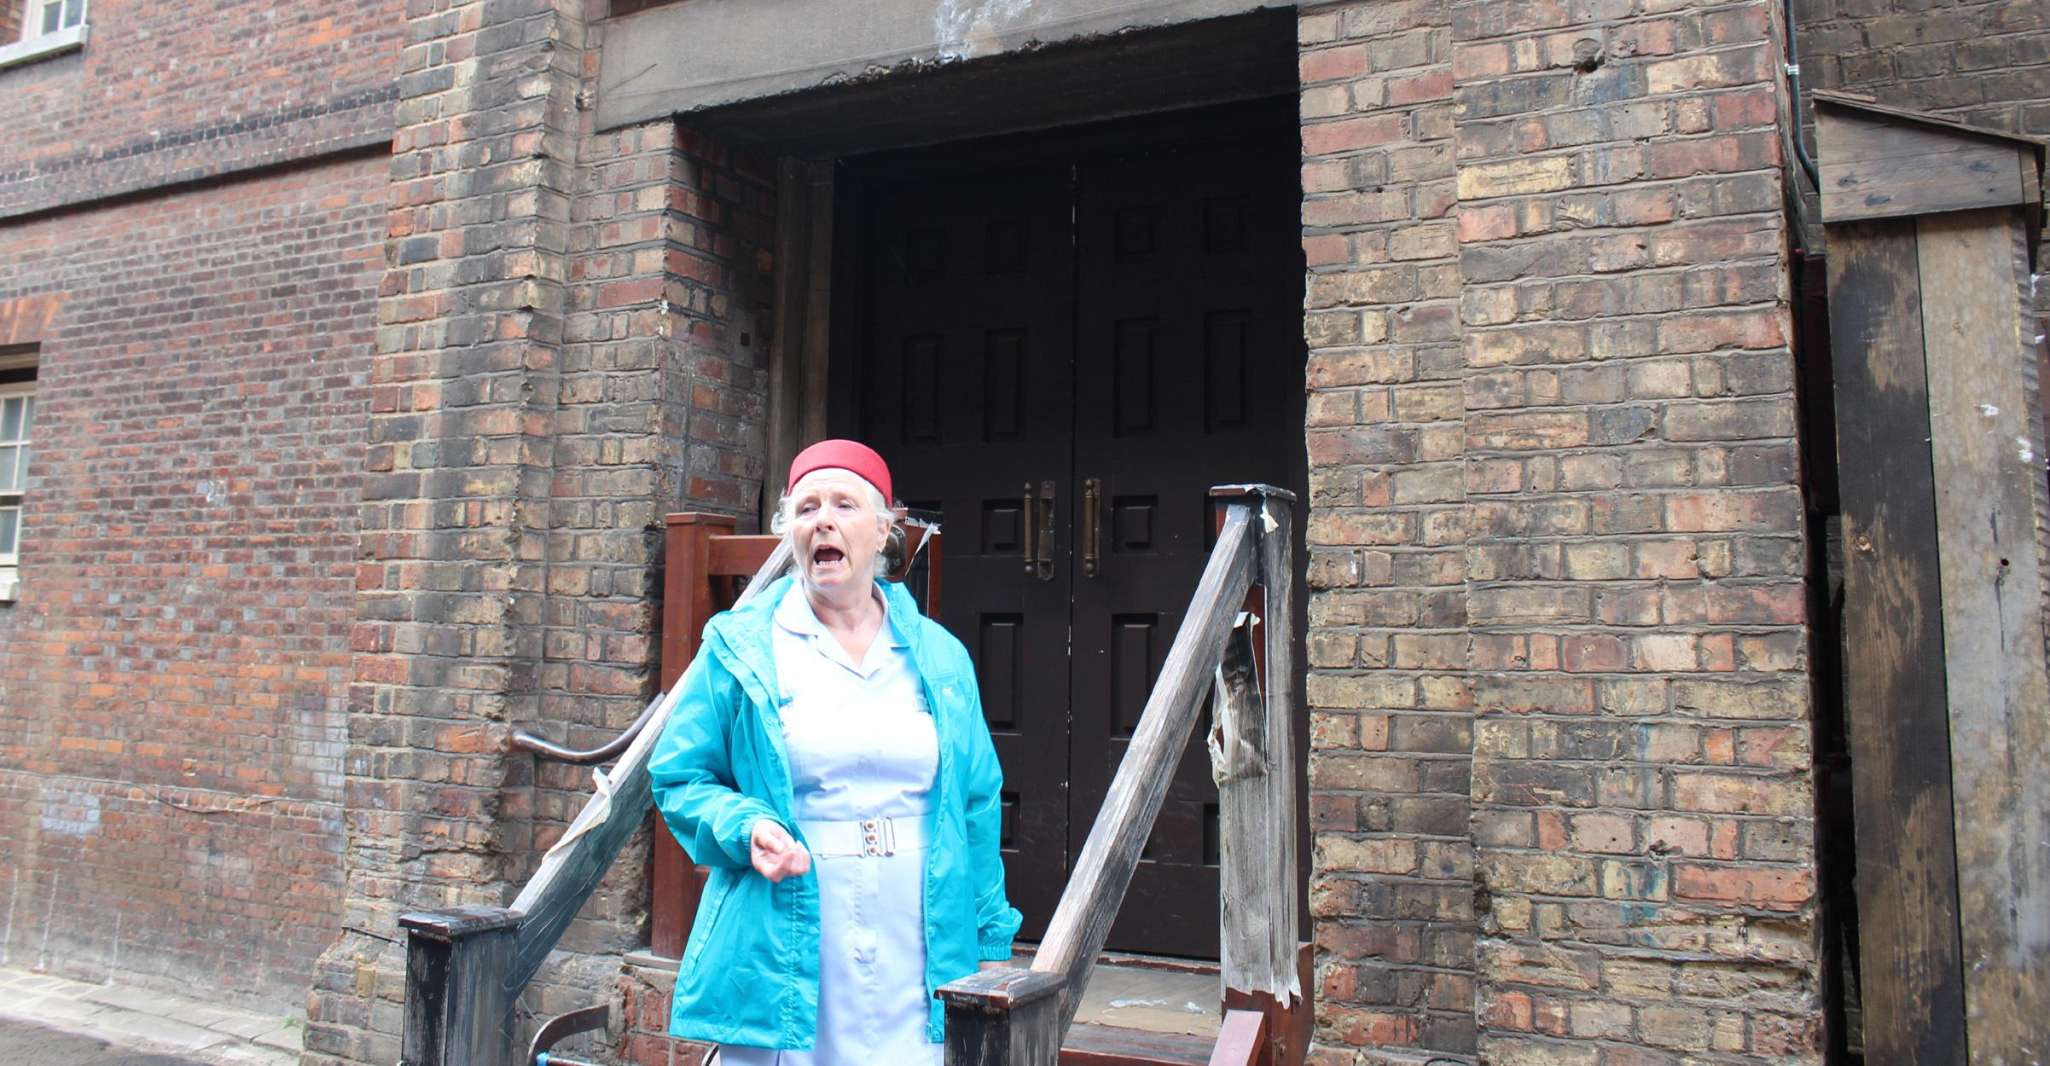 Chatham Historic Dockyard, Call the Midwife Tour - Housity